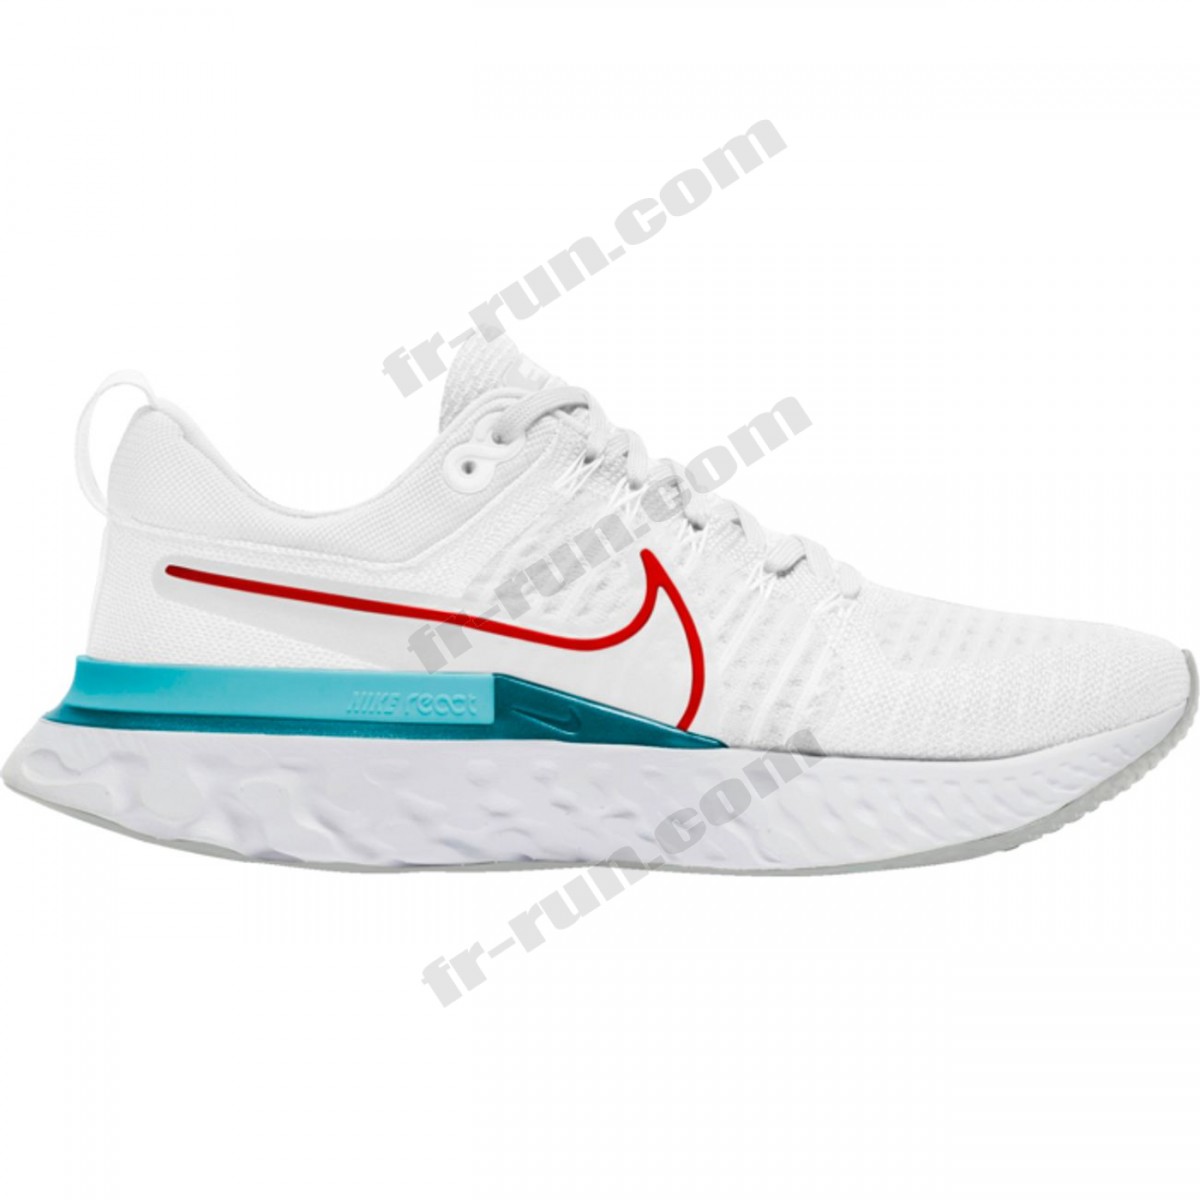 Nike/CHAUSSURES BASSES running homme NIKE NIKE REACT INFINITY RUN FK 2 √ Nouveau style √ Soldes - Nike/CHAUSSURES BASSES running homme NIKE NIKE REACT INFINITY RUN FK 2 √ Nouveau style √ Soldes